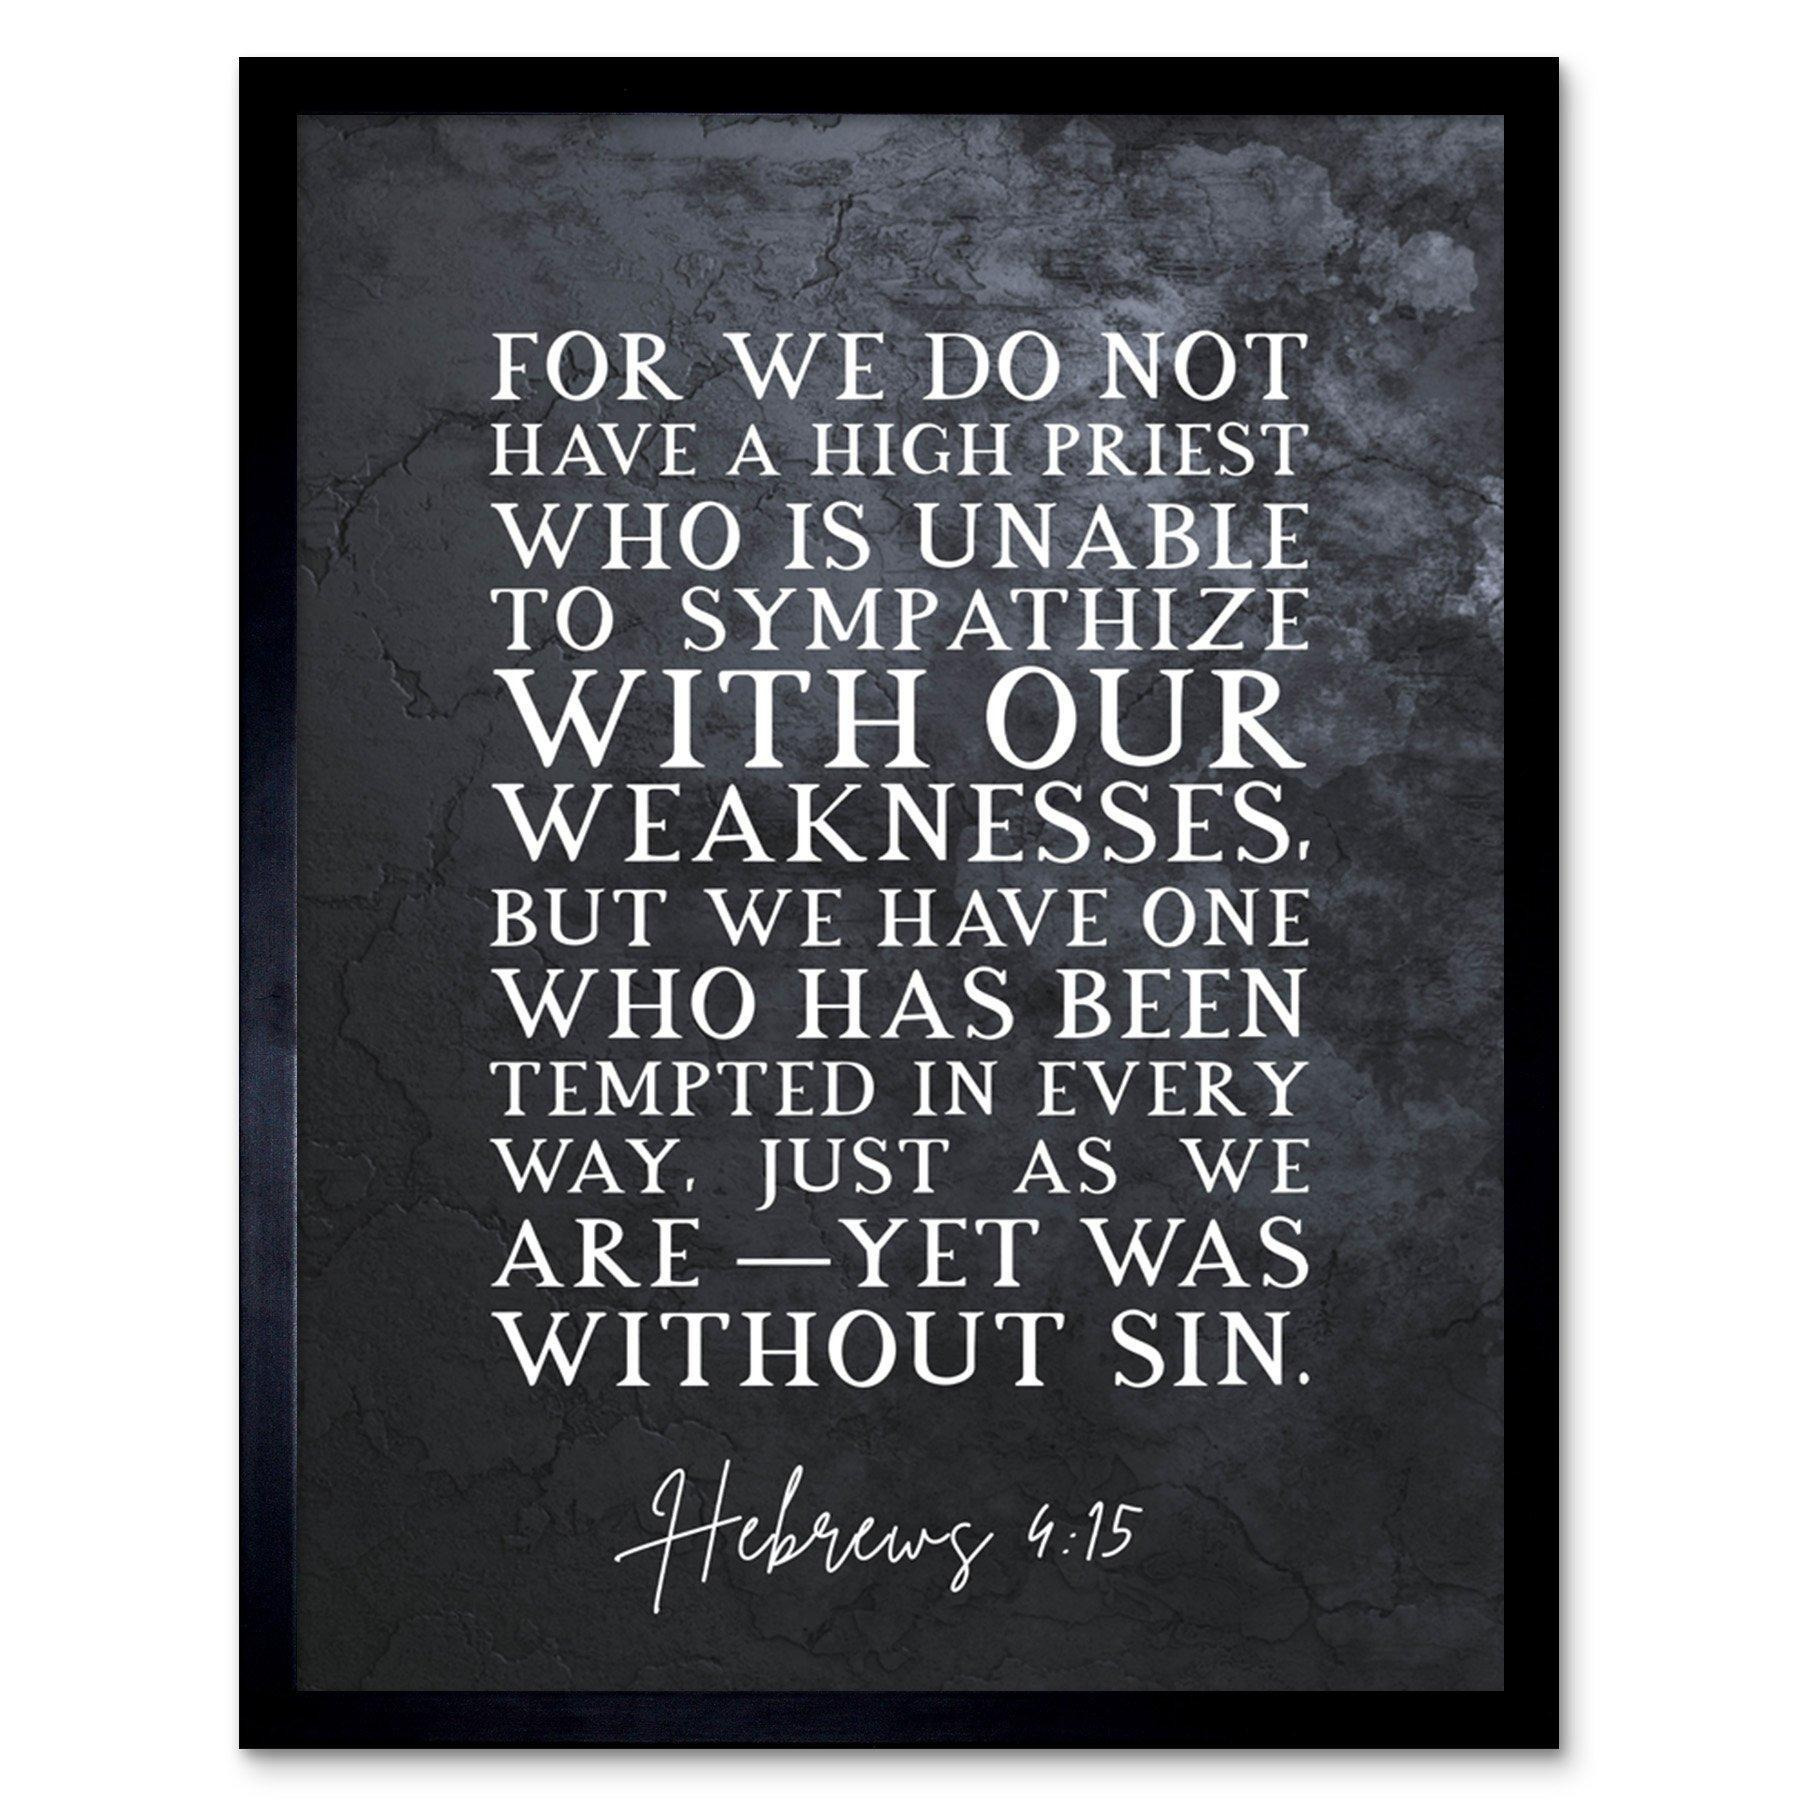 Wall Art Print Hebrews 4:15 One Who Has Been Tempted Yet Was Without Sin Christian Bible Verse Quote Scripture Typography Art Framed - image 1